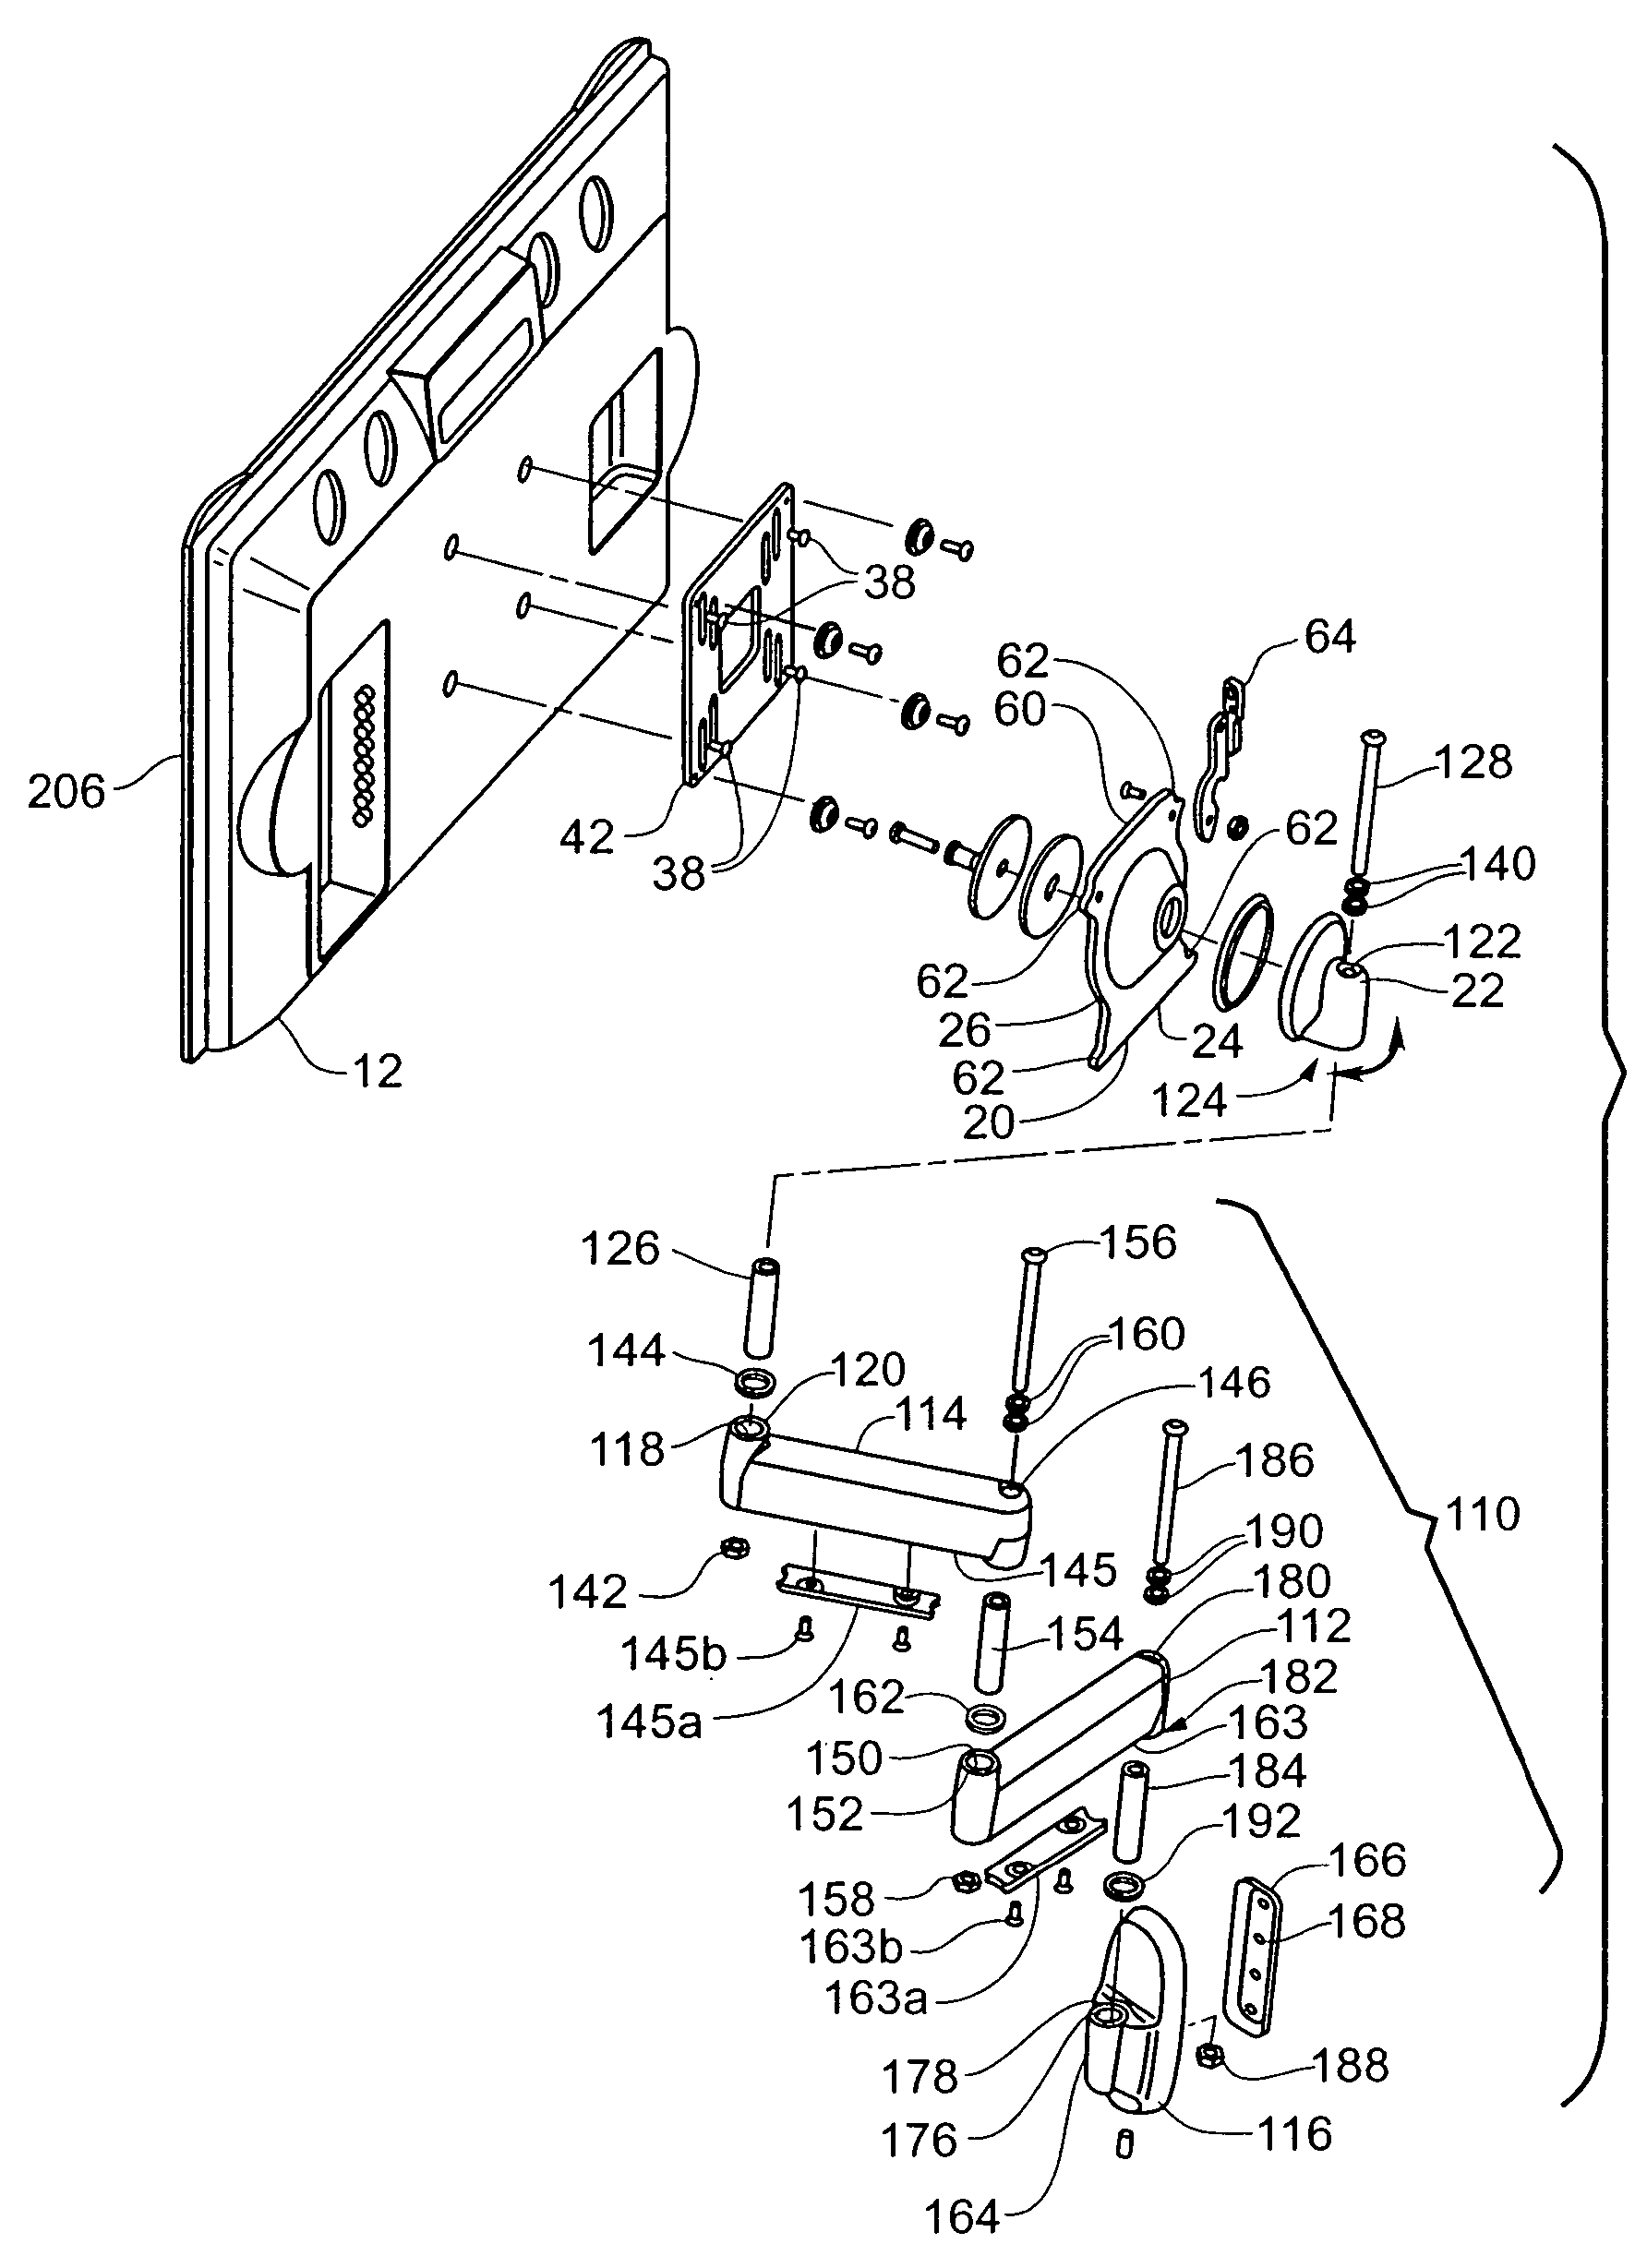 Self-balancing adjustable mounting system with friction adjustment